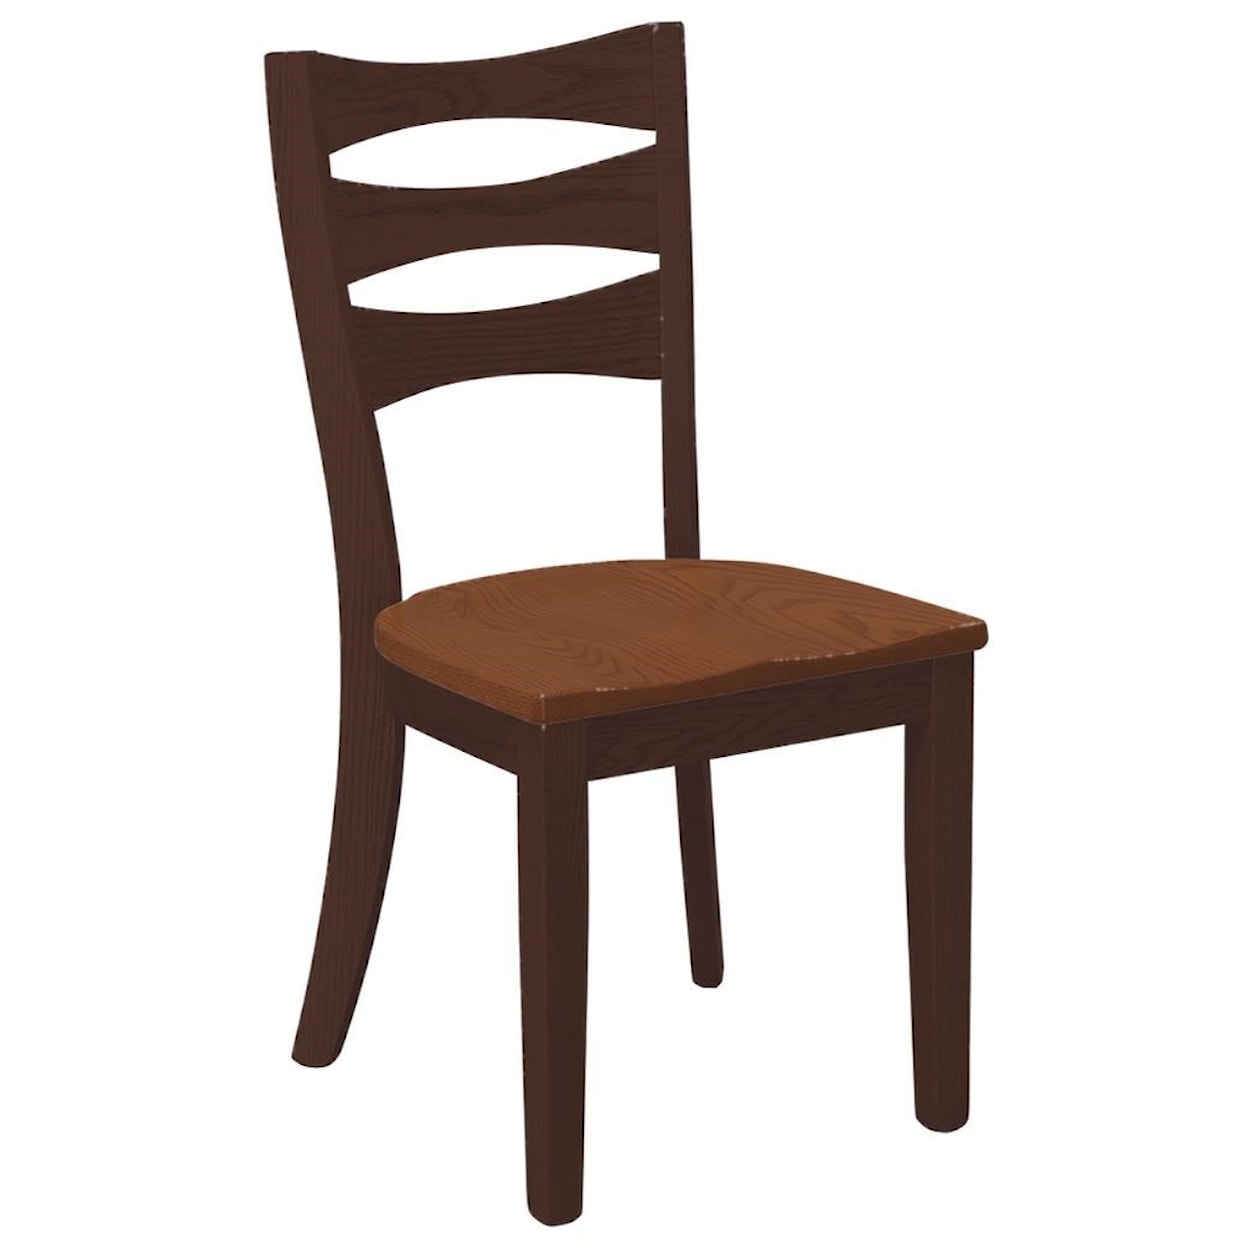 Daniels Amish Chairs and Barstools Sierra Side Chair